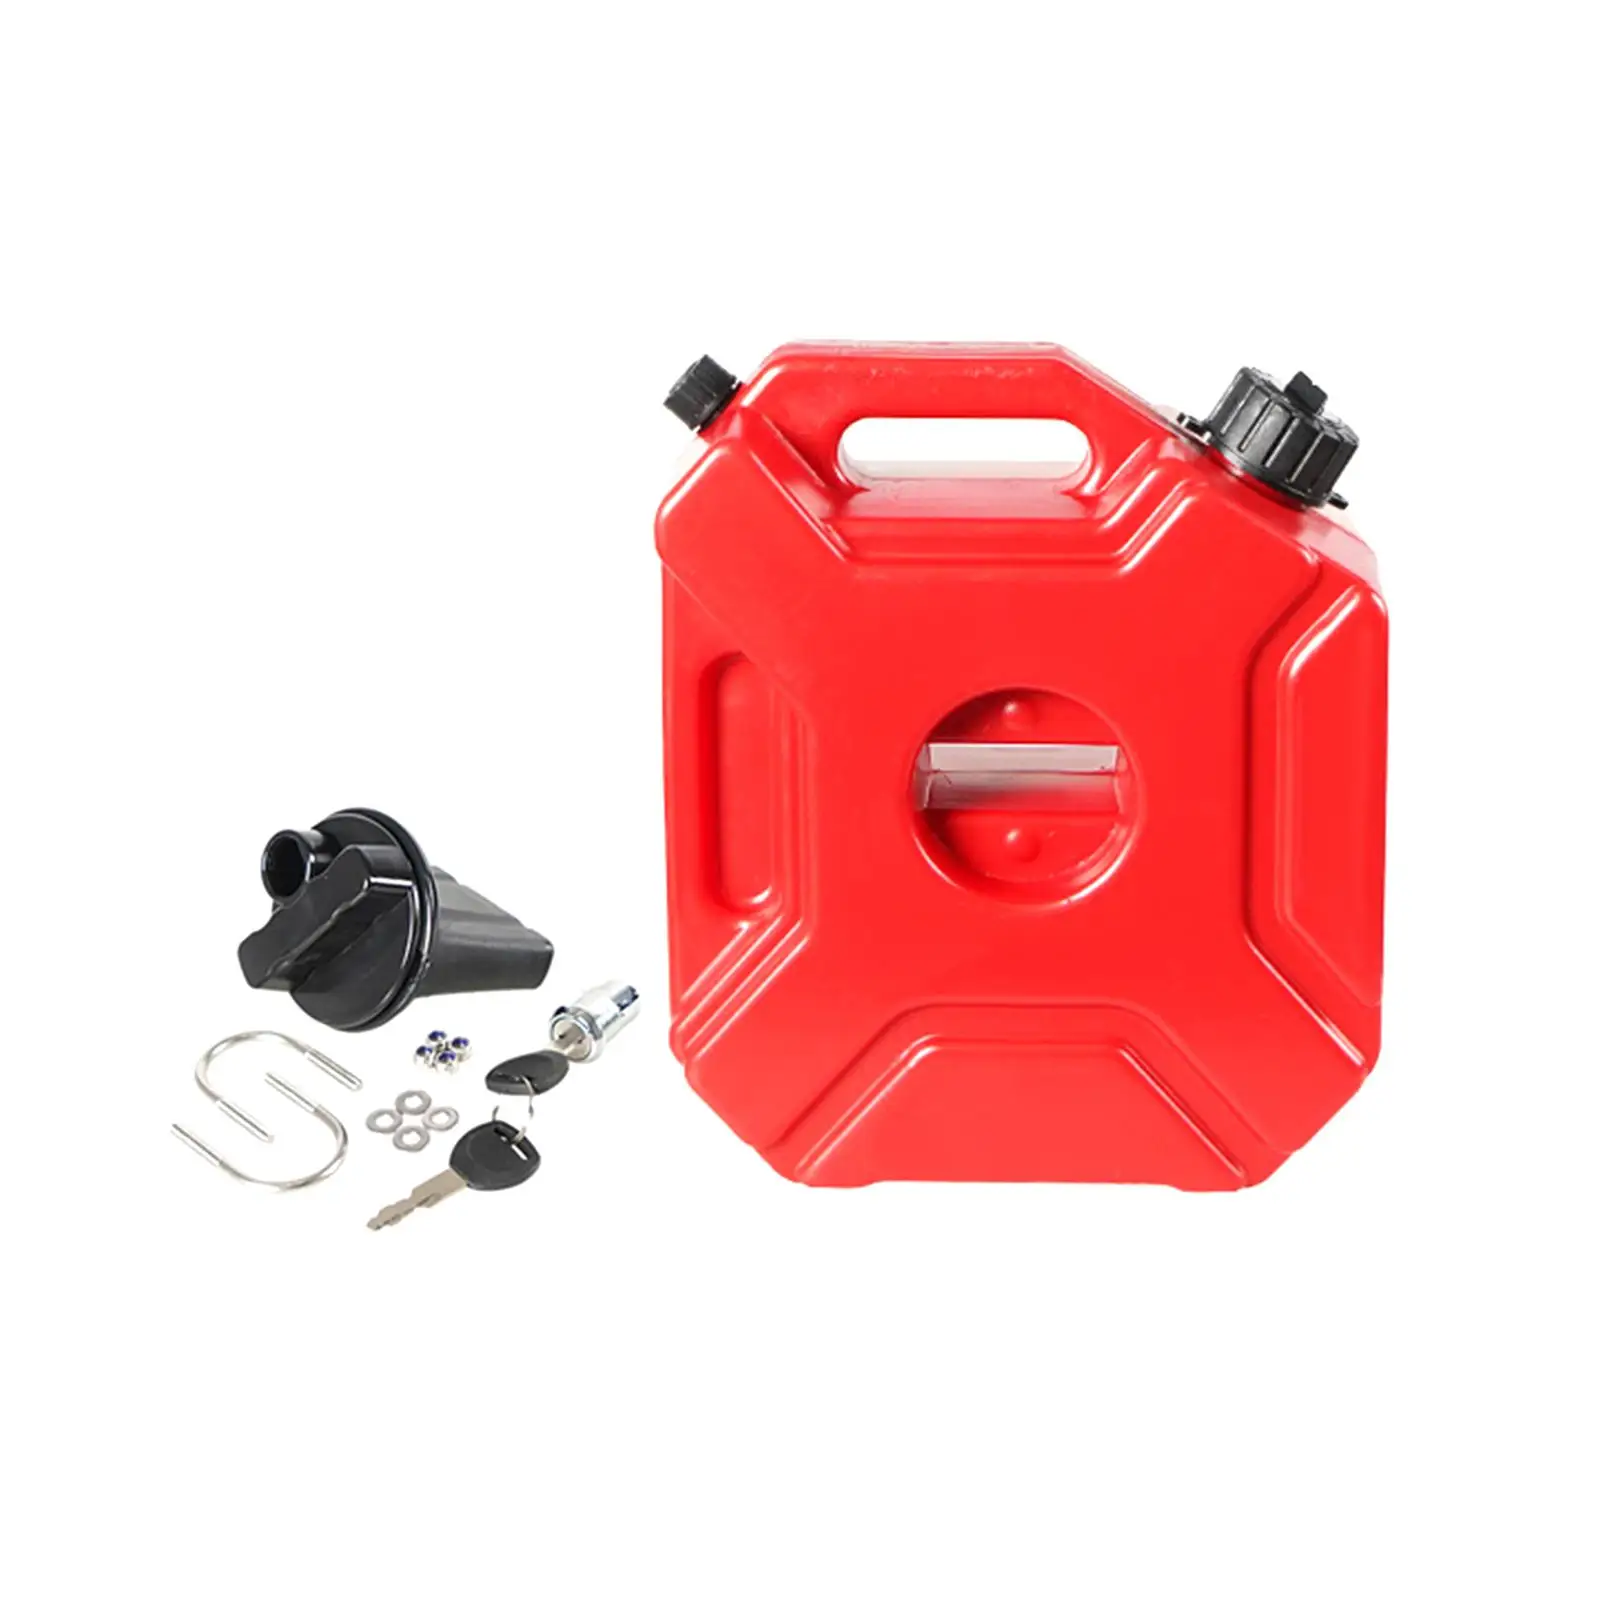 Petrol Tanks 5L with Lock Spare Tank for Motorcycle Most Cars Accessory